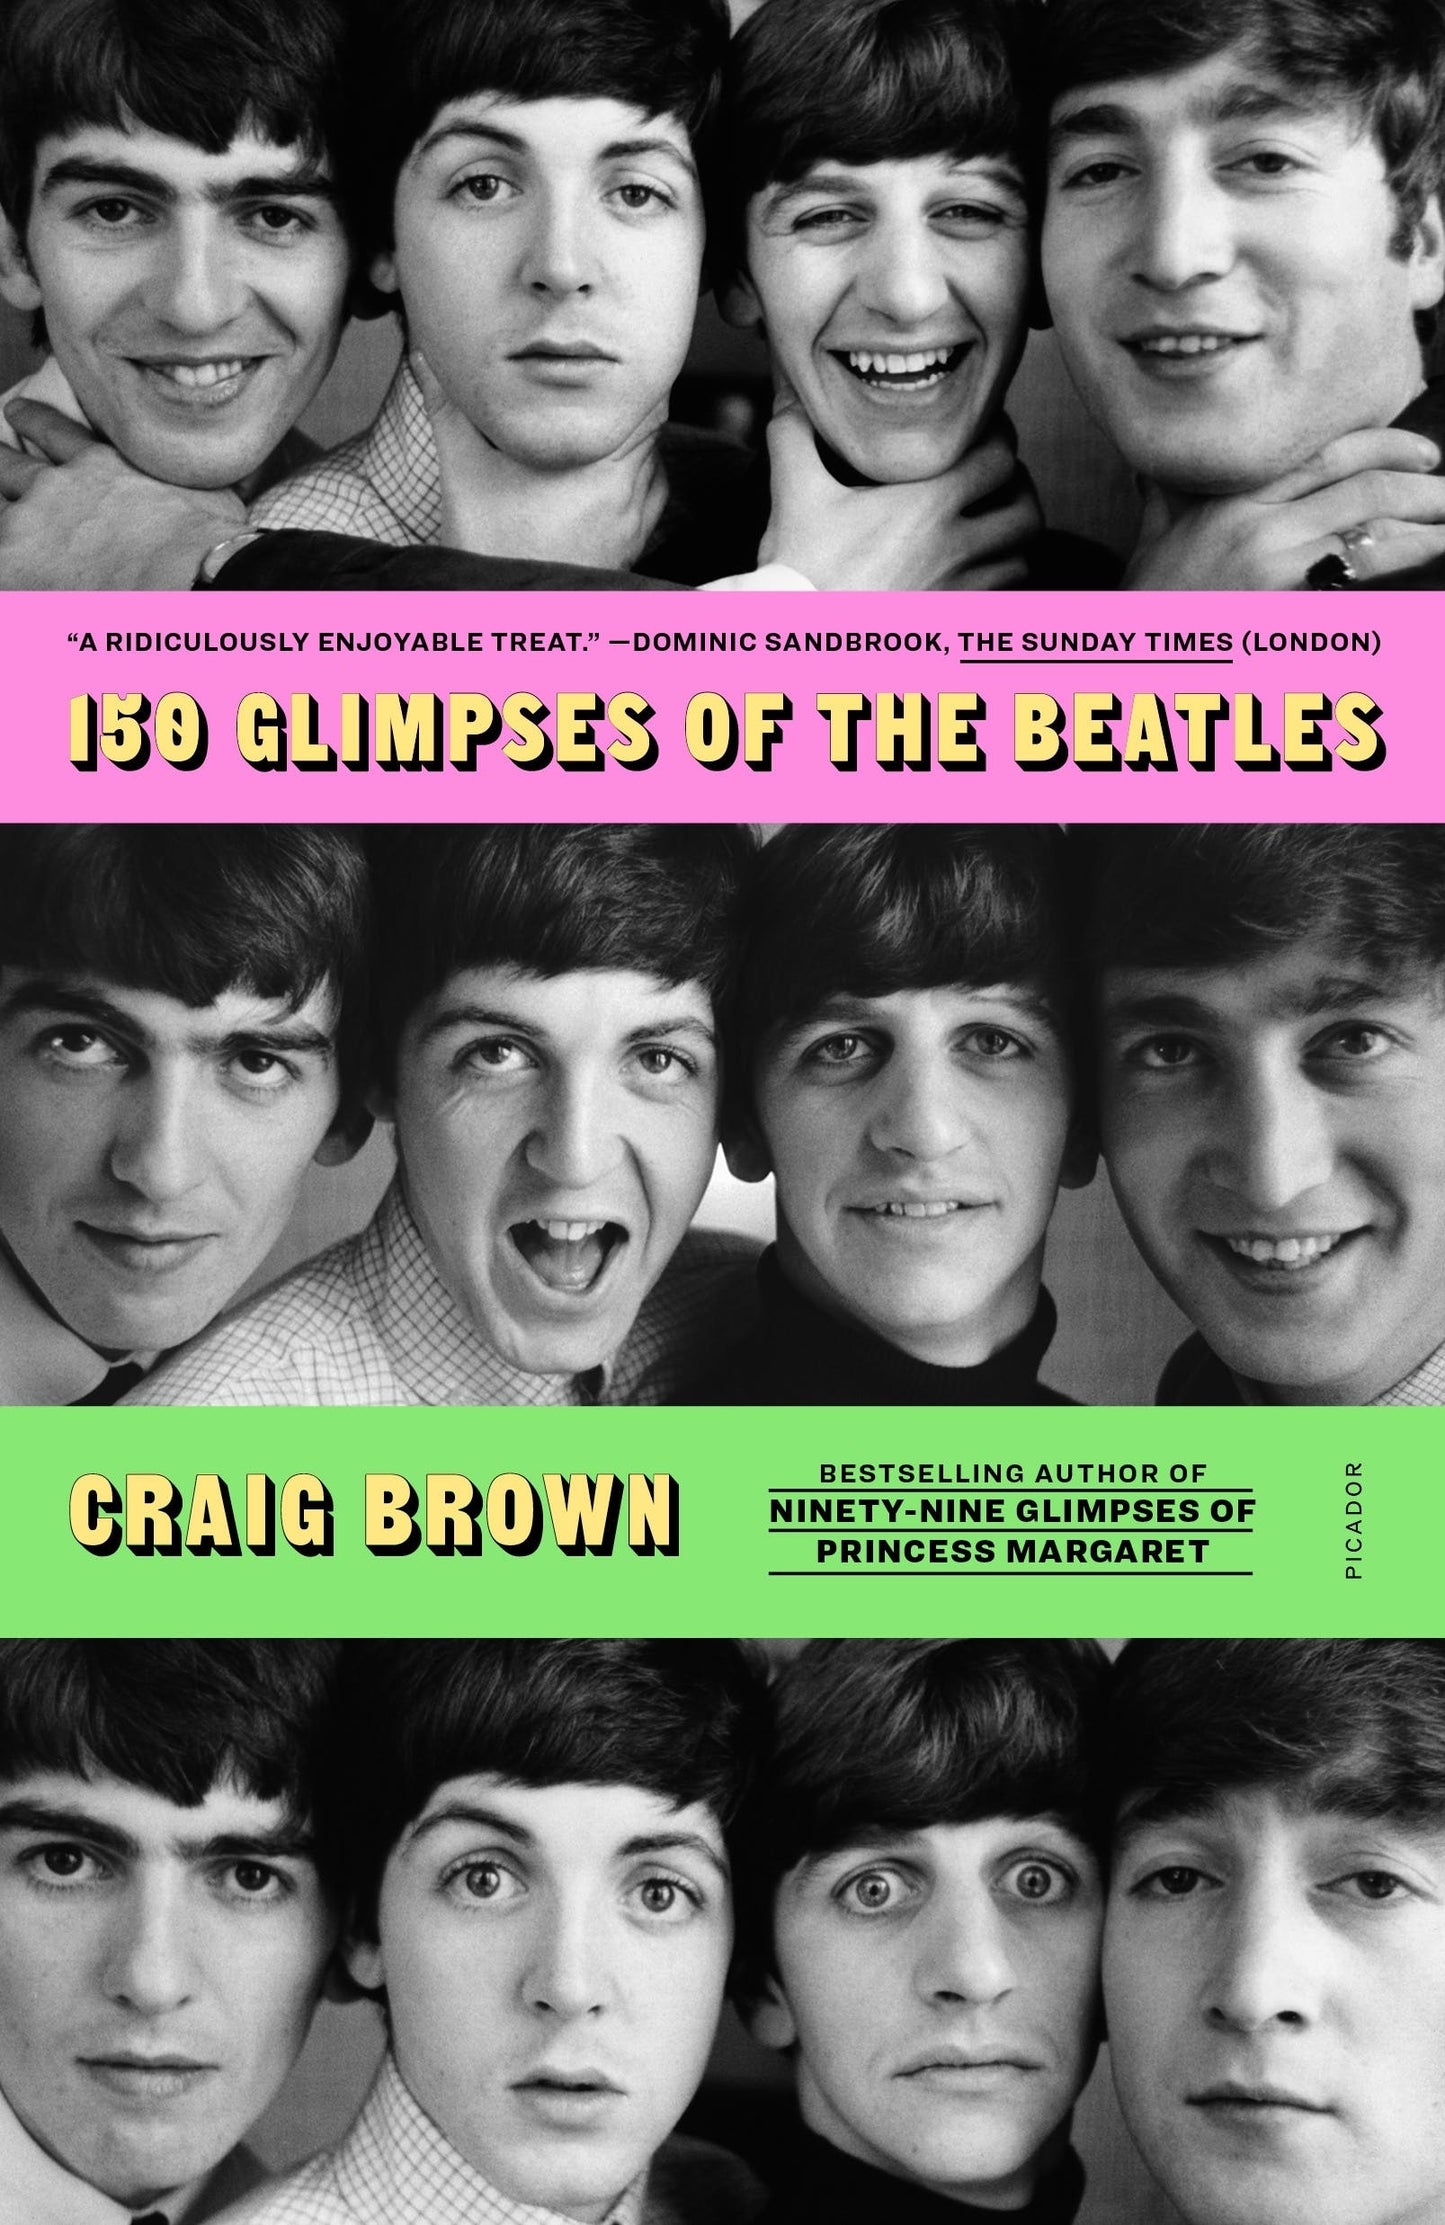 THE BEATLES - 150 GLIMPSES OF THE BEATLES - PAPERBACK - BOOK